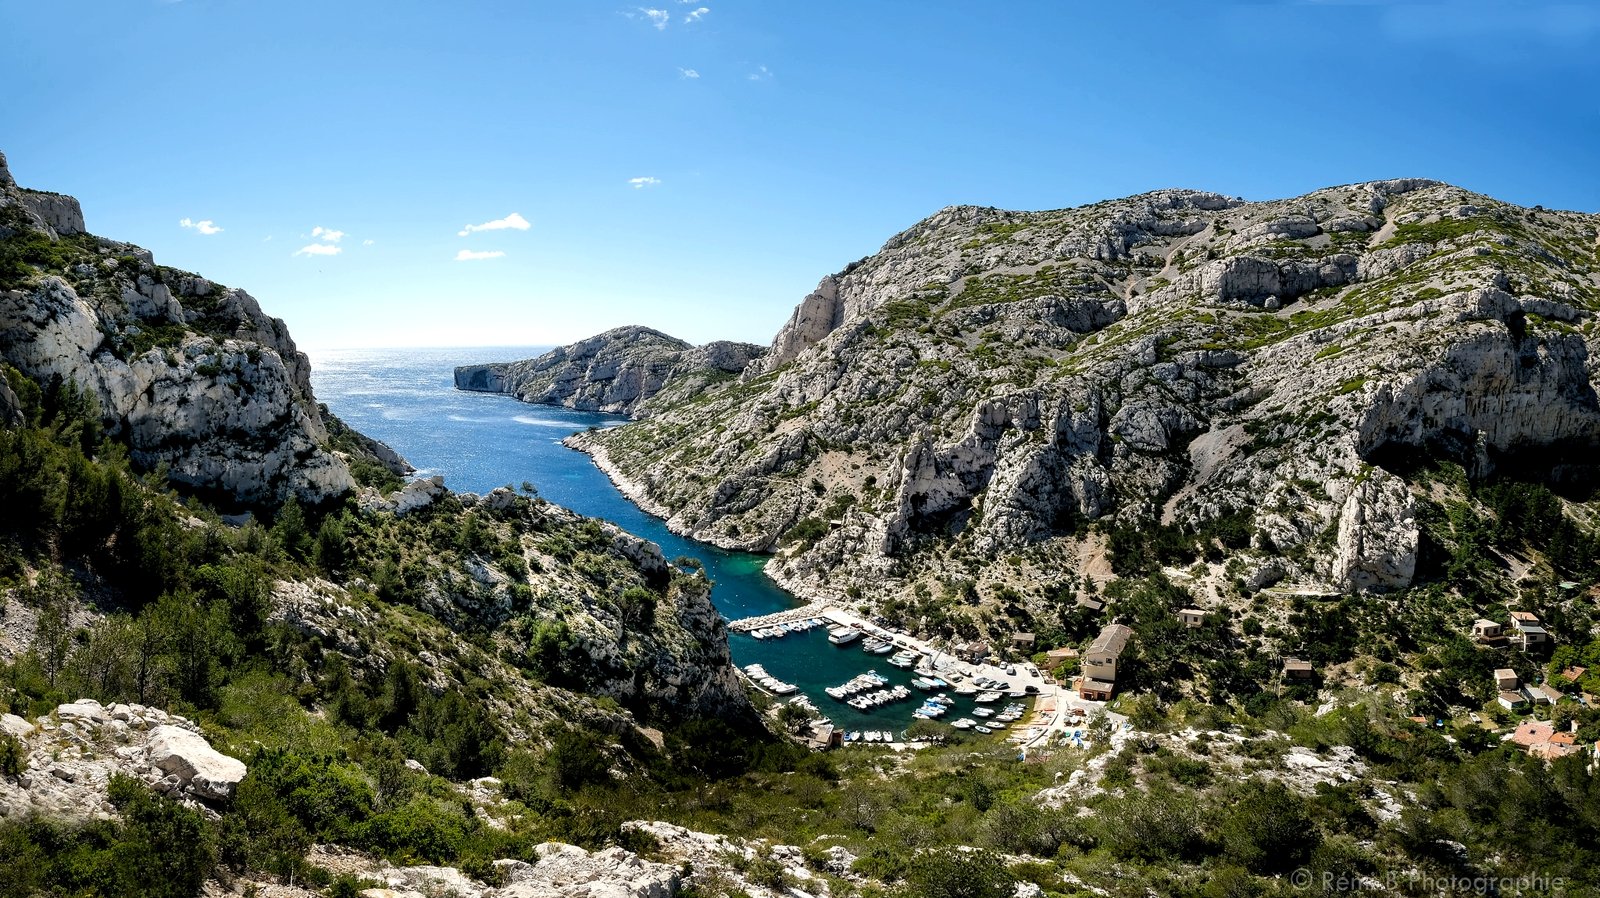 How to take an excursion to the calanques in Marseille